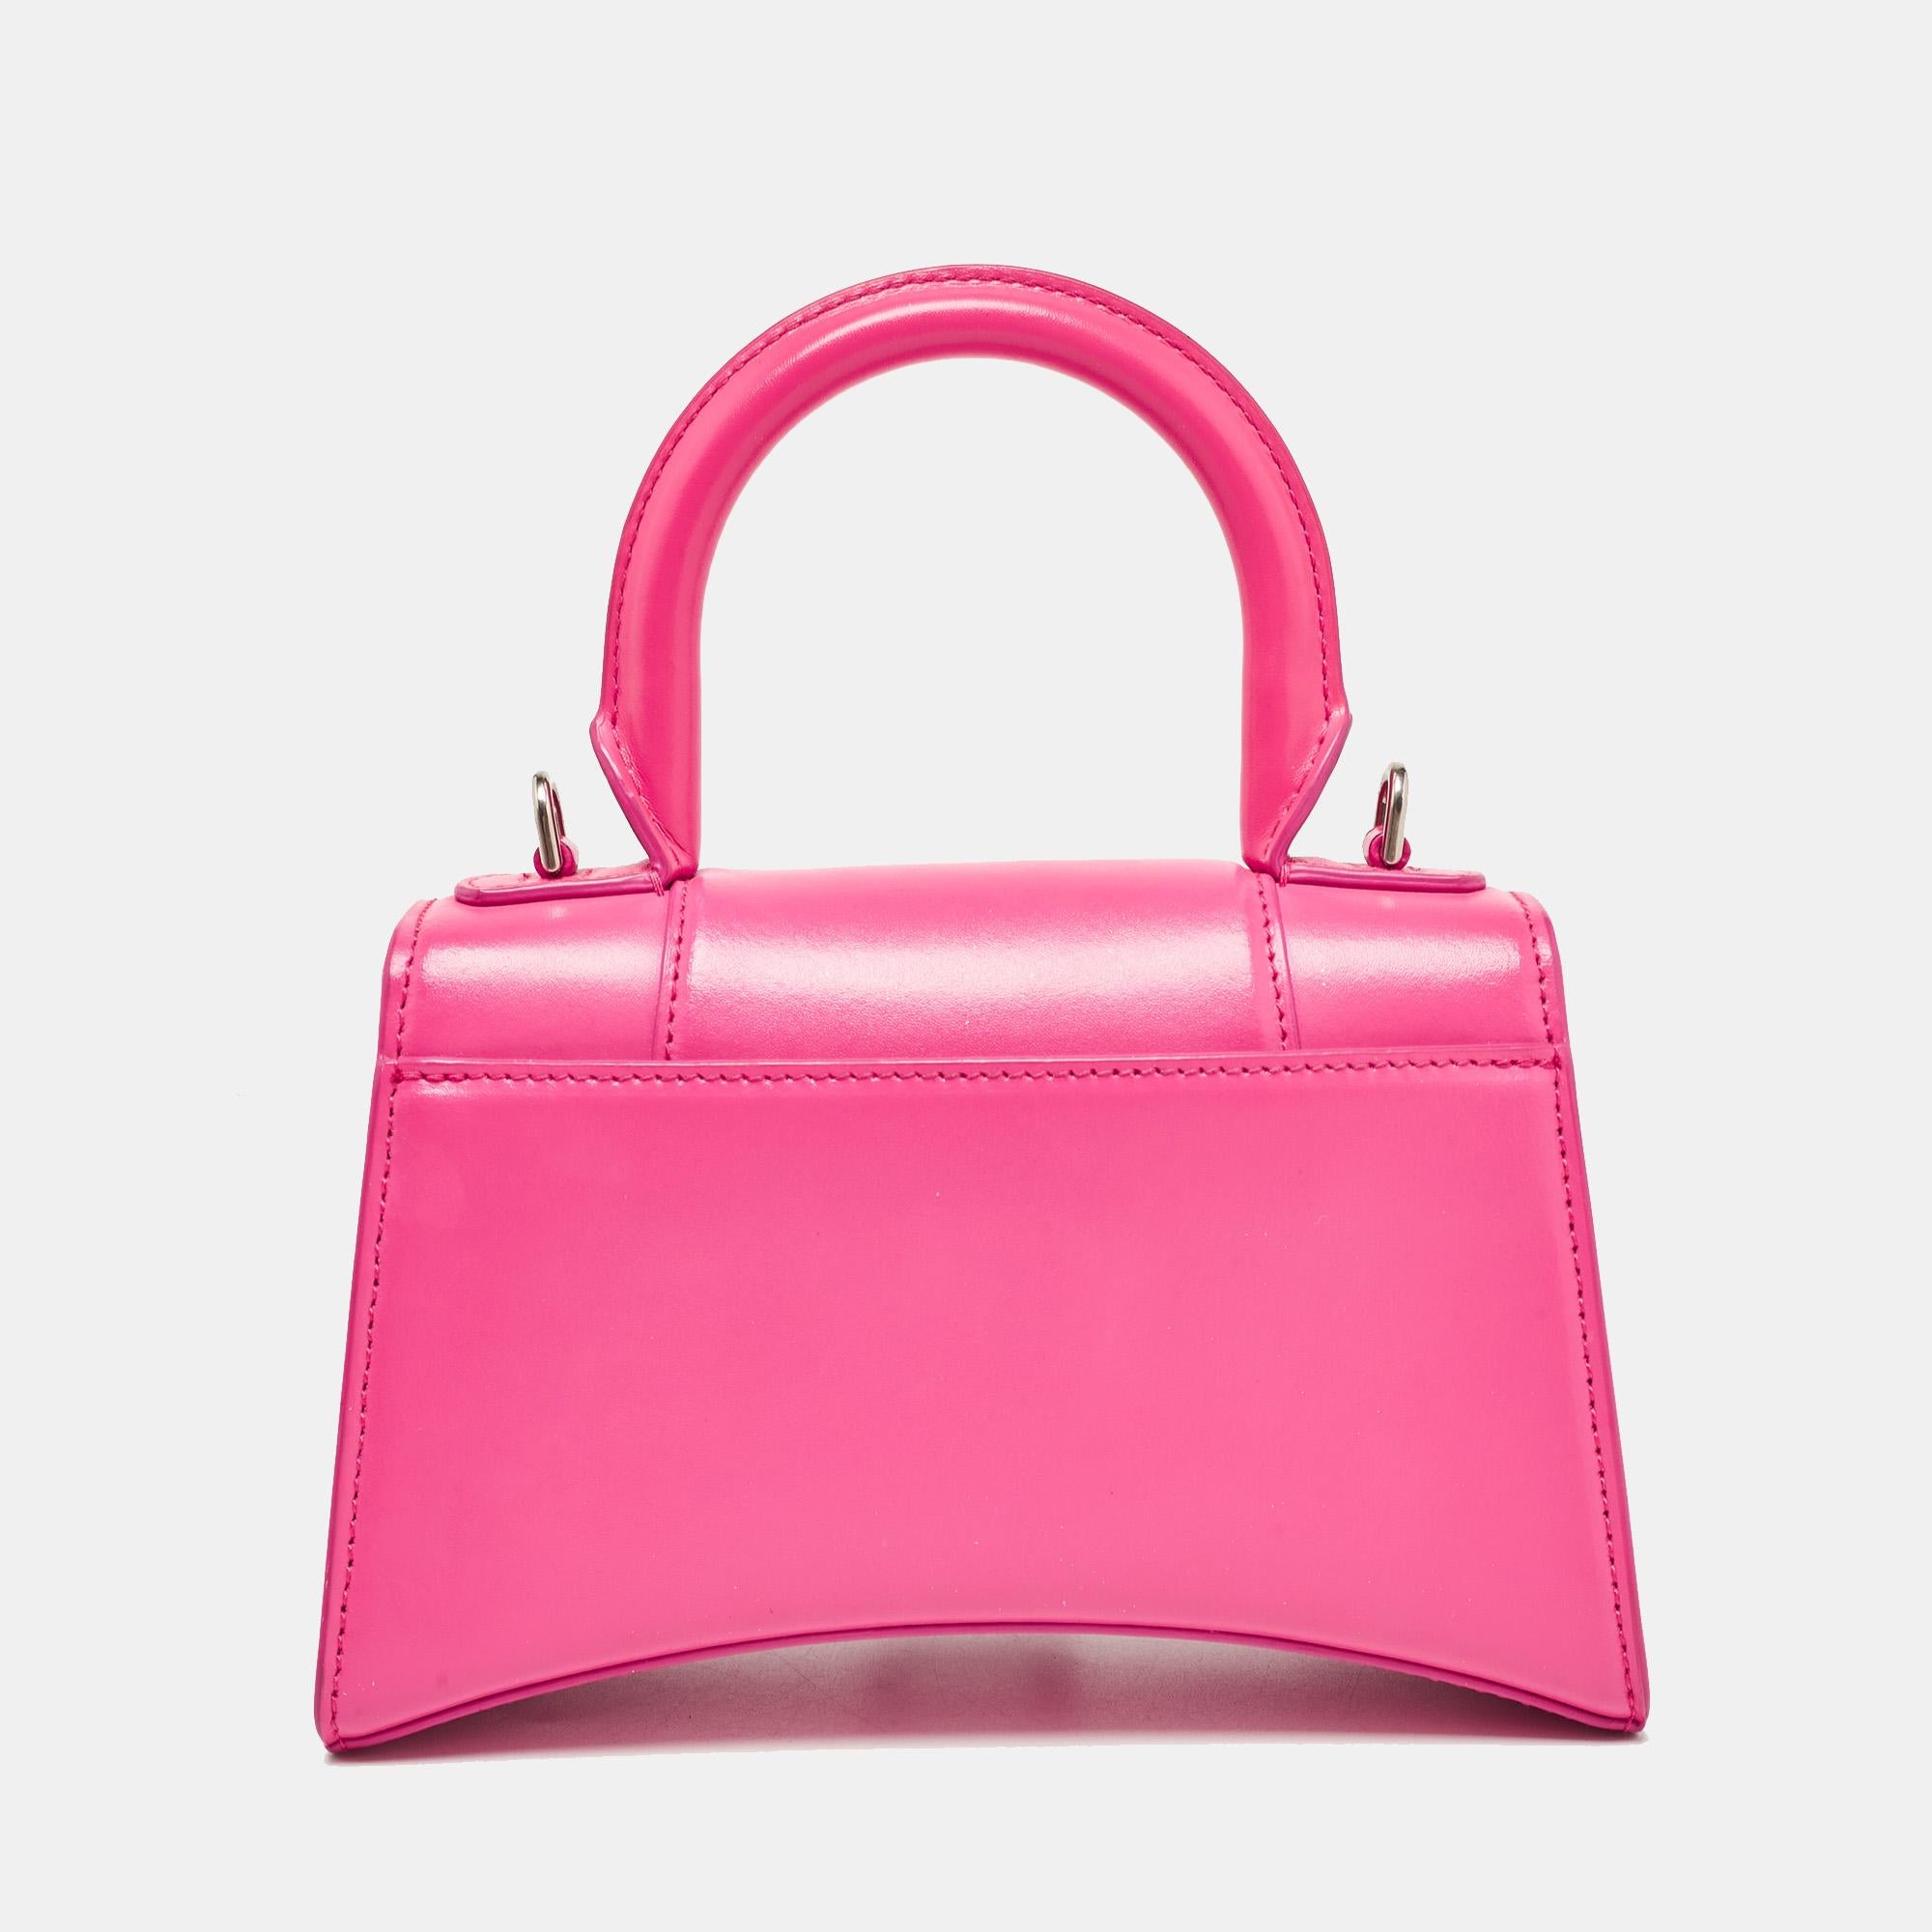 Balenciaga's Hourglass bag is fast becoming a must-have bag. Crafted using leather, the XS Hourglass top handle bag is styled with a flap that has the iconic B logo. The bag has a lined interior, a shapely top handle, and a shoulder